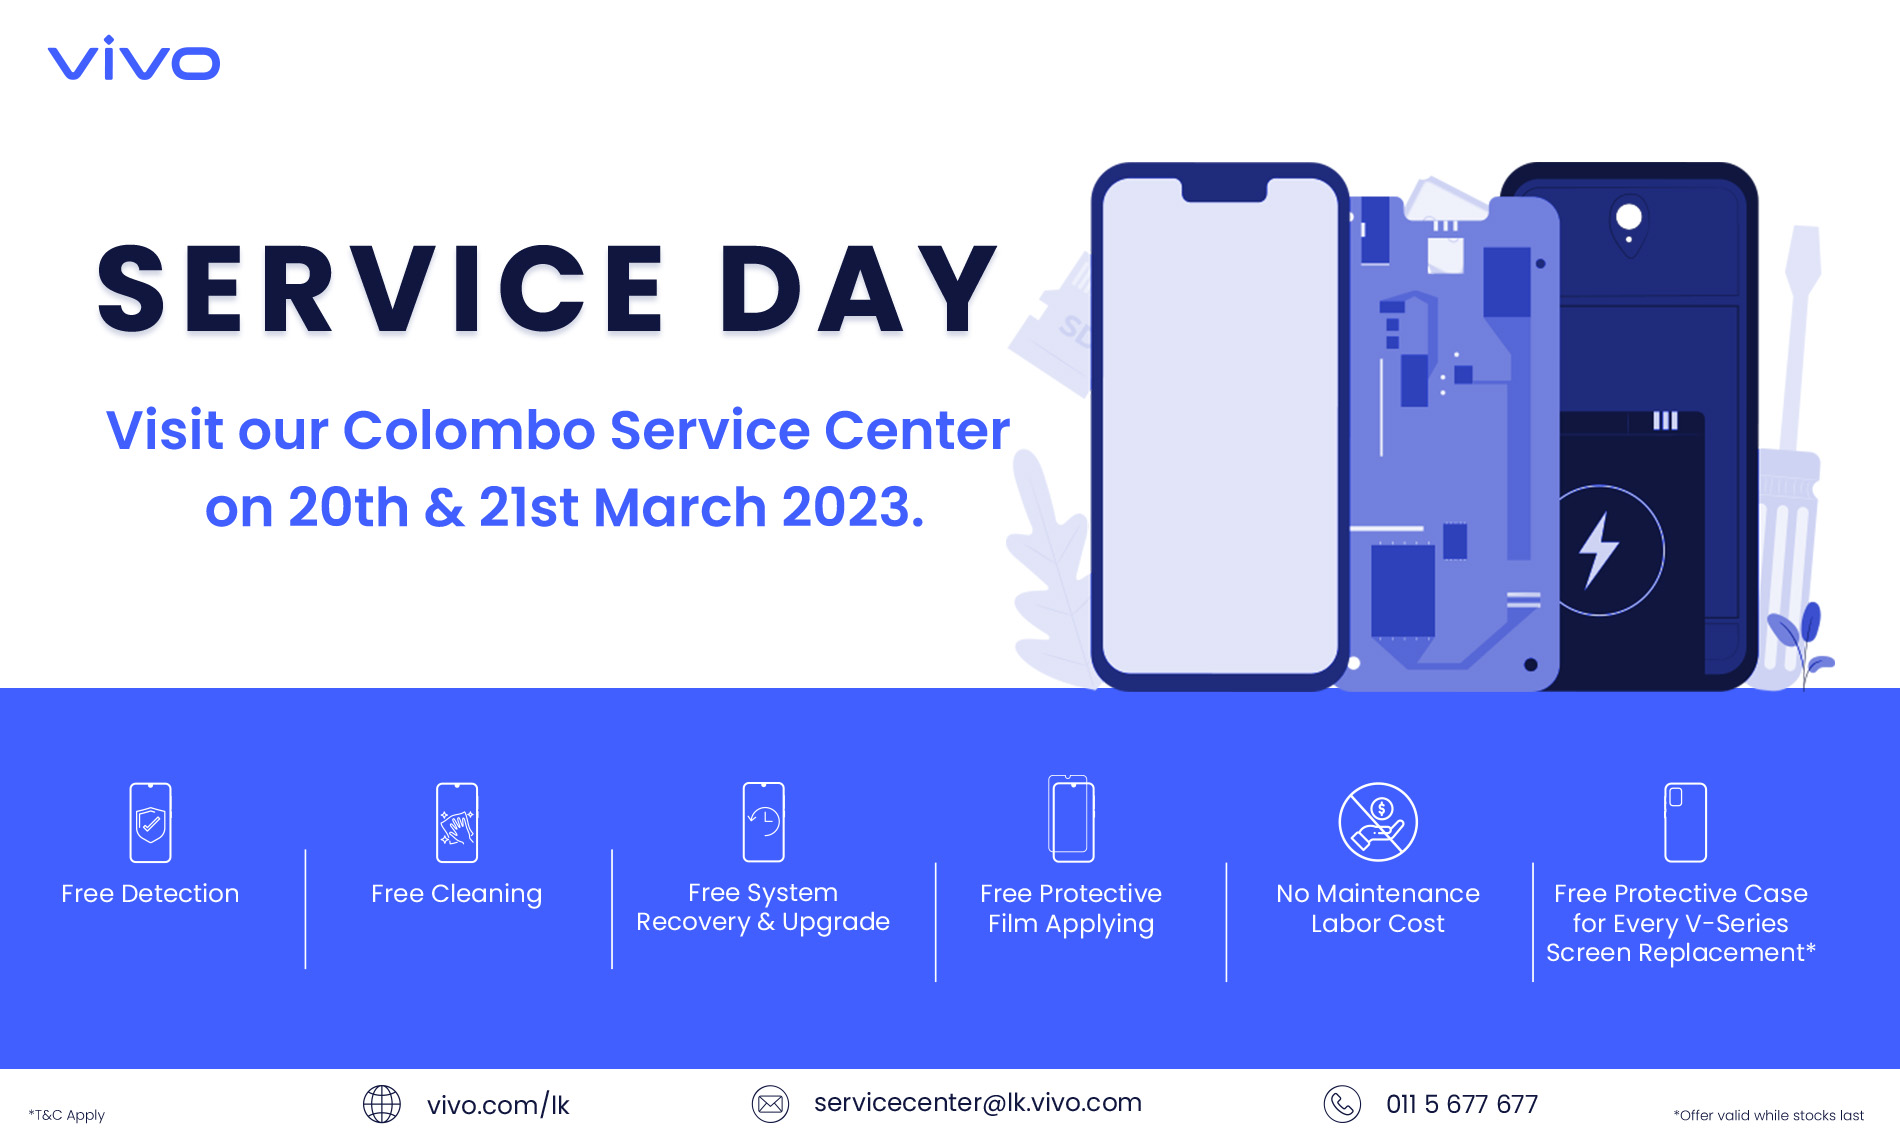 vivo Service Day Benefits in March